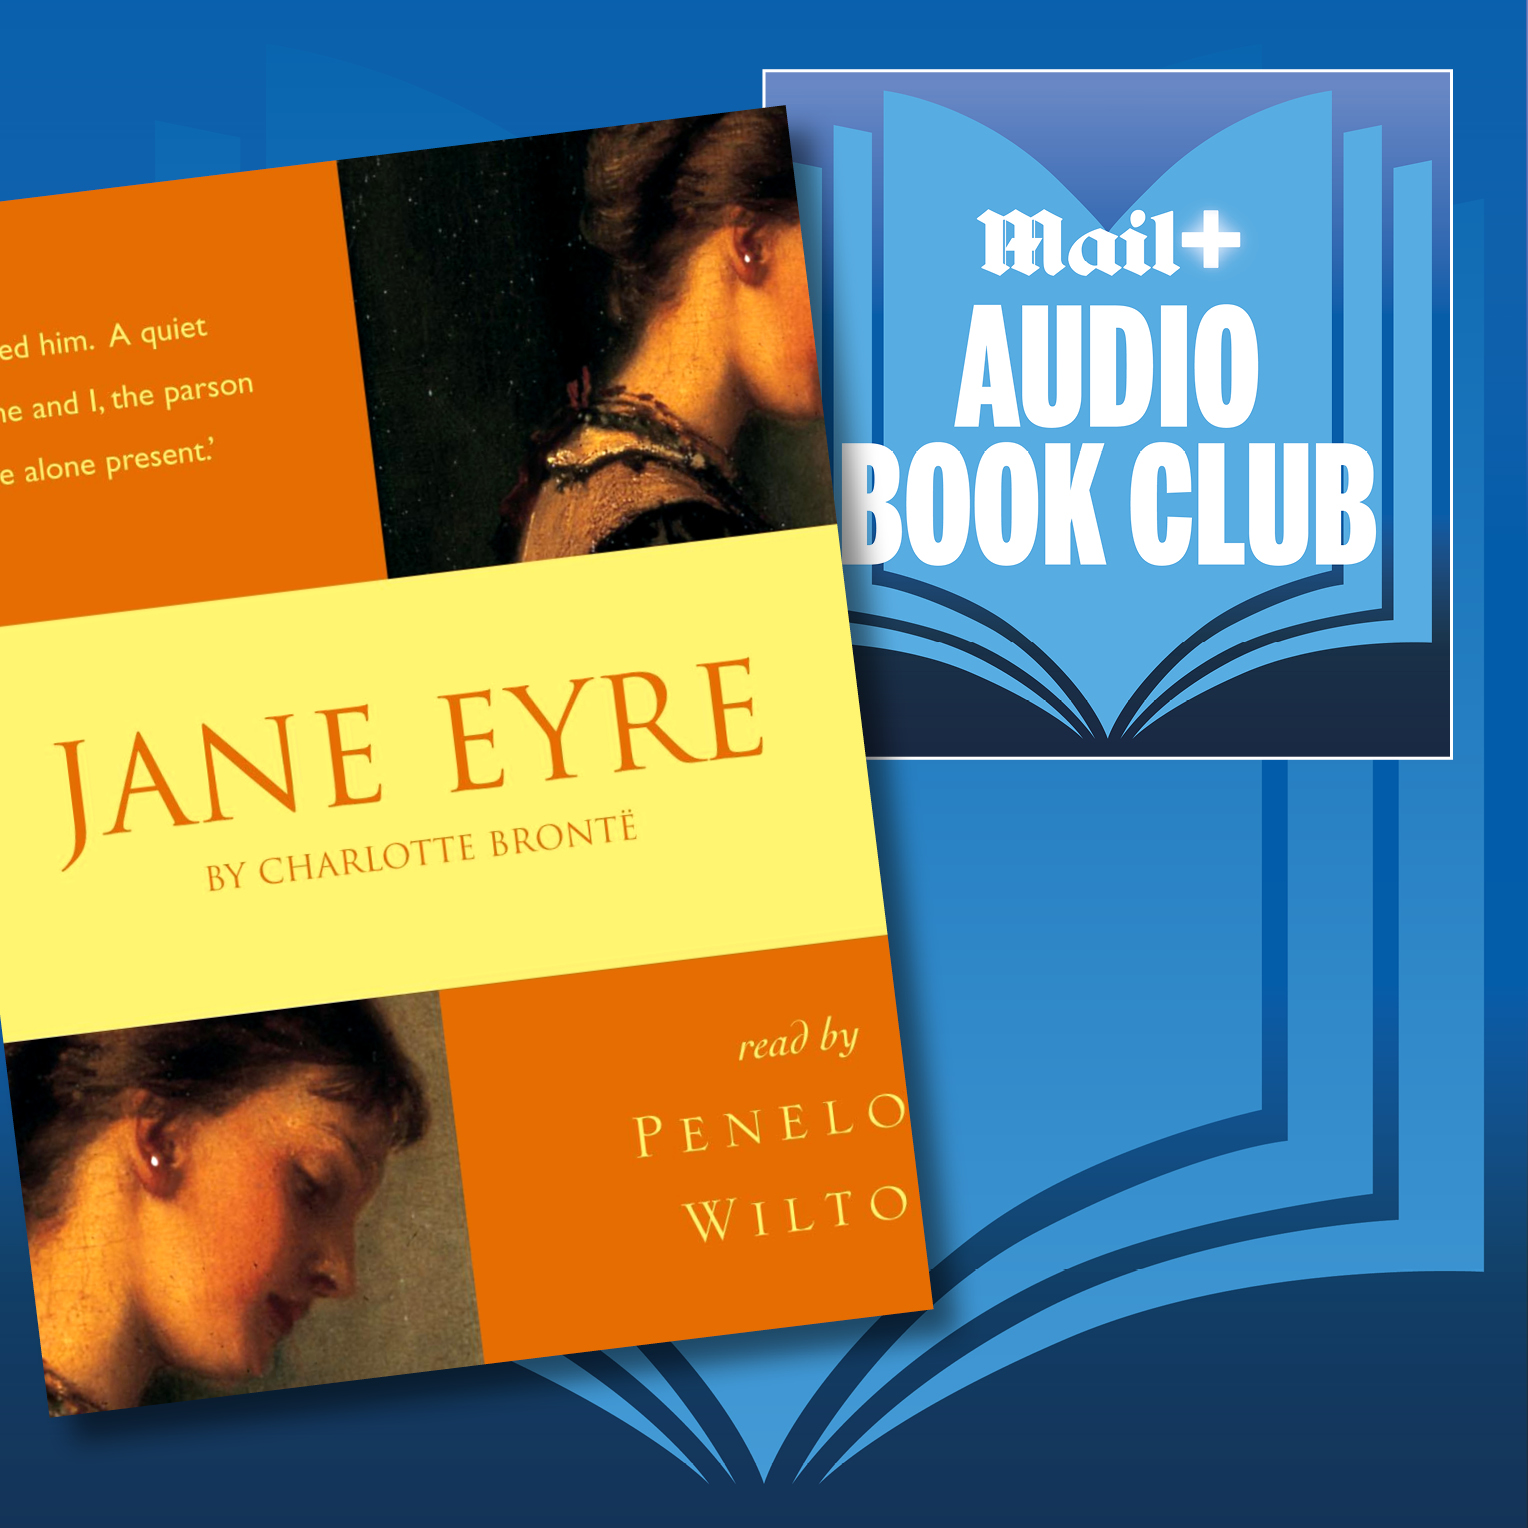 Jane Eyre by Charlotte Bronte from Mail+ Audio Book Club